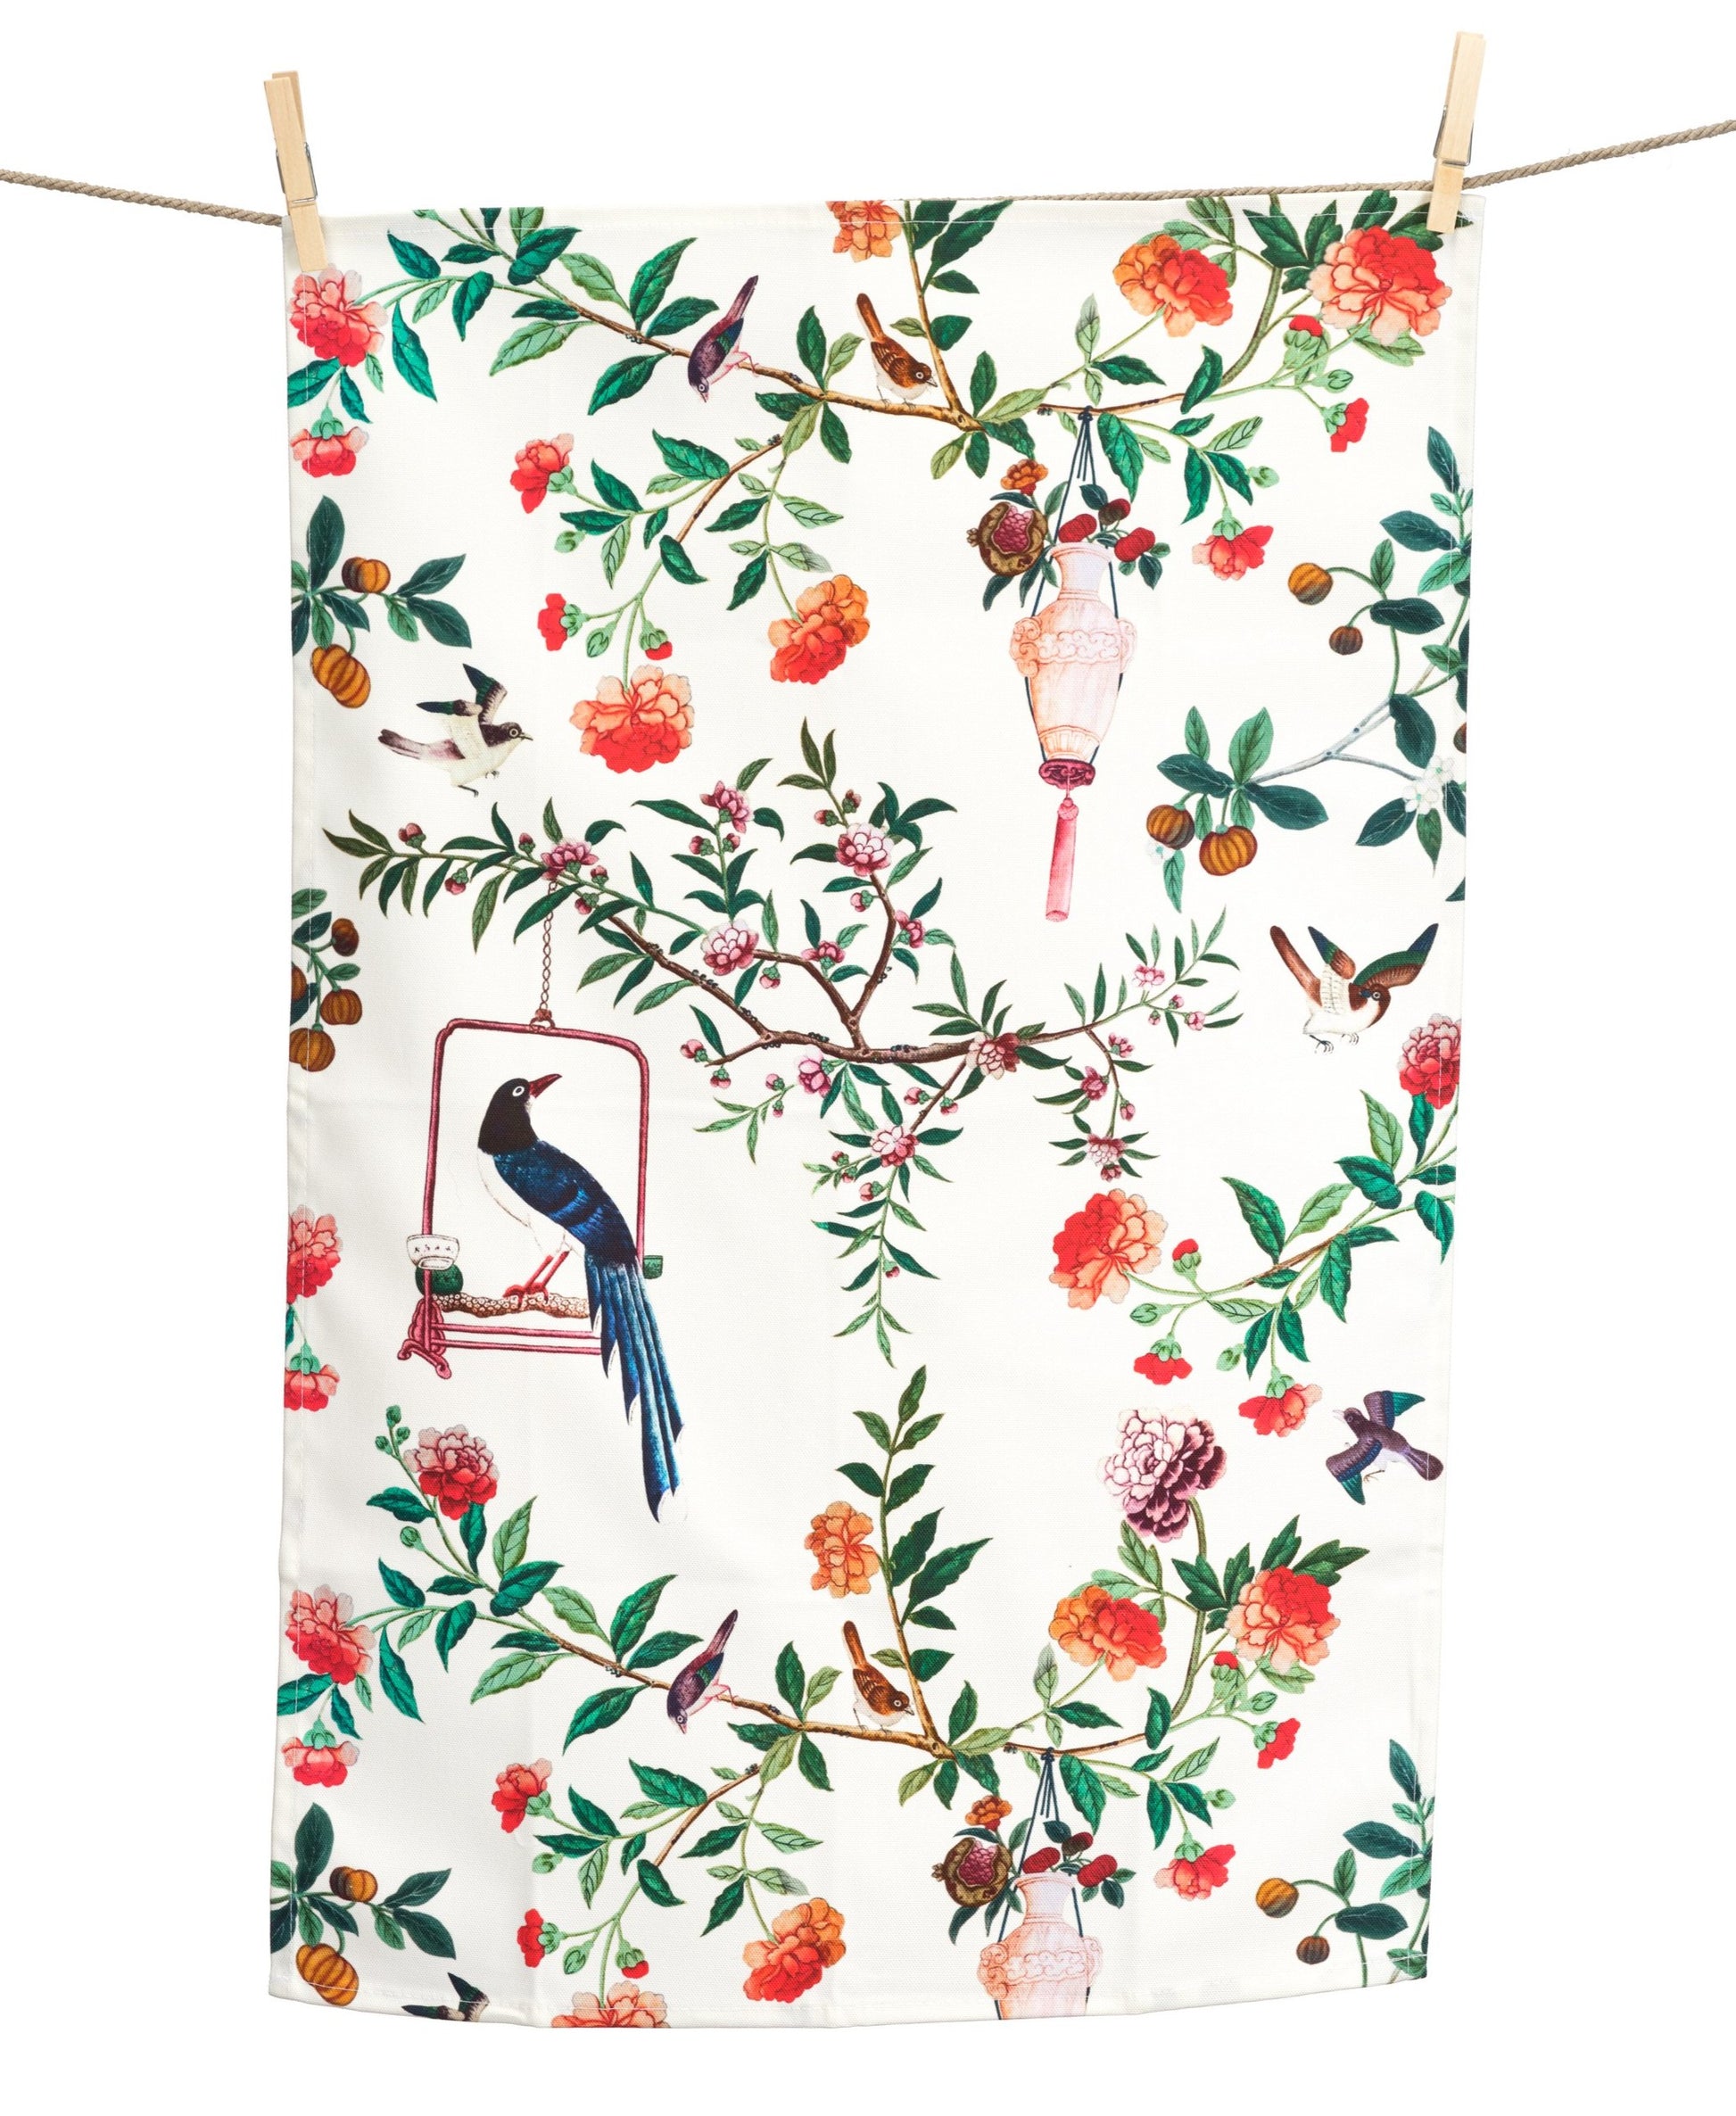 A tea towel hanging from a washing line. The design features a bird perched on a swing and lanterns hanging from tree branches.